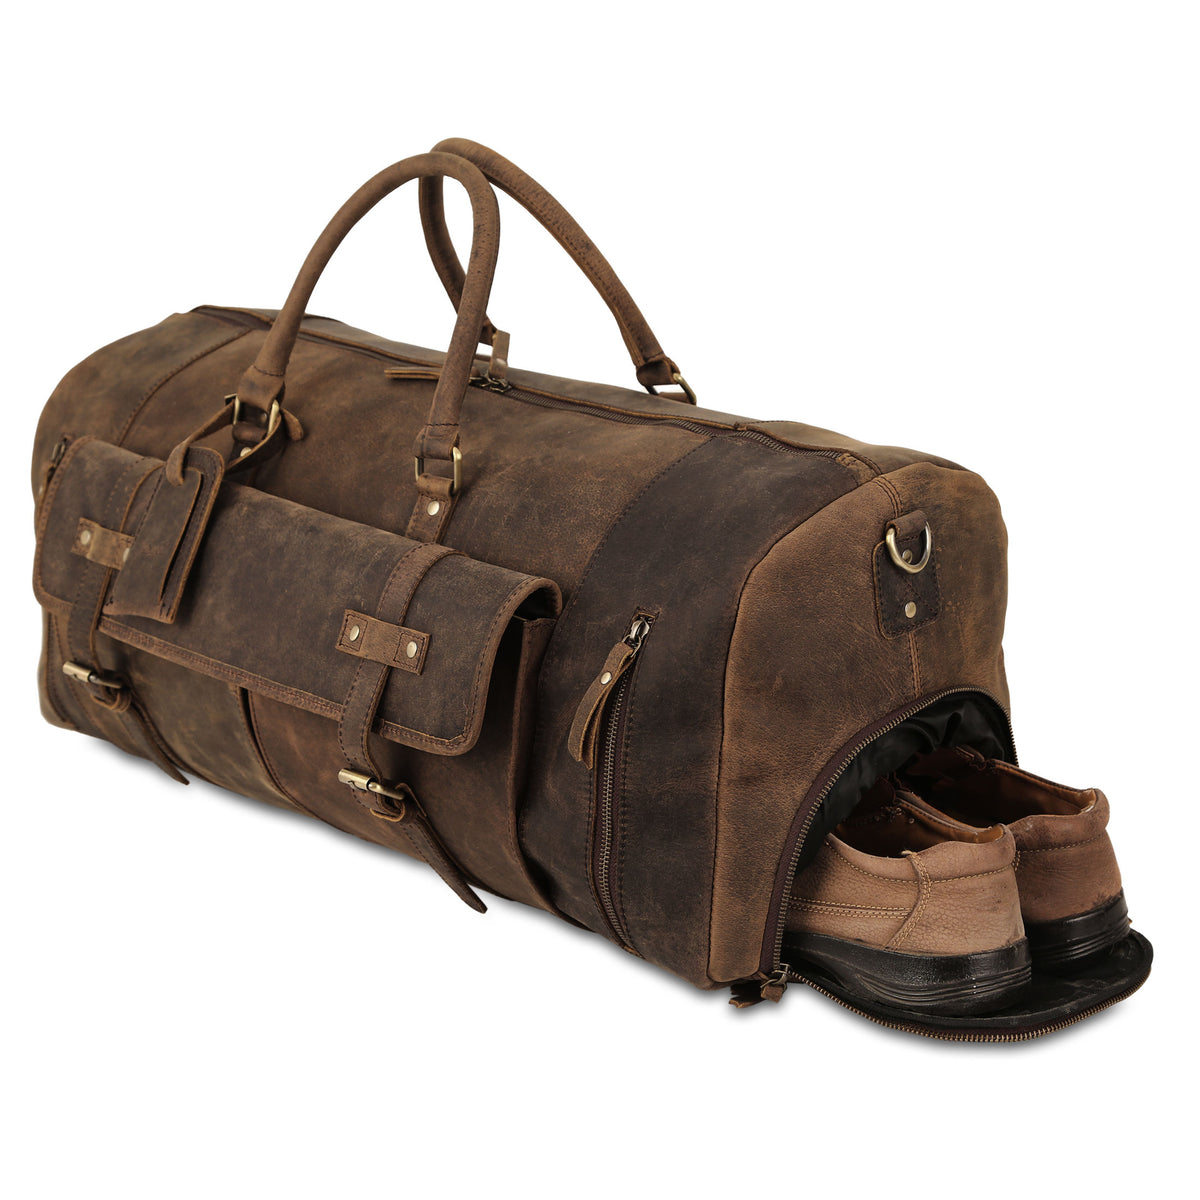 28 Inch Leather Duffel Bags for Men and Women Full Grain Leather